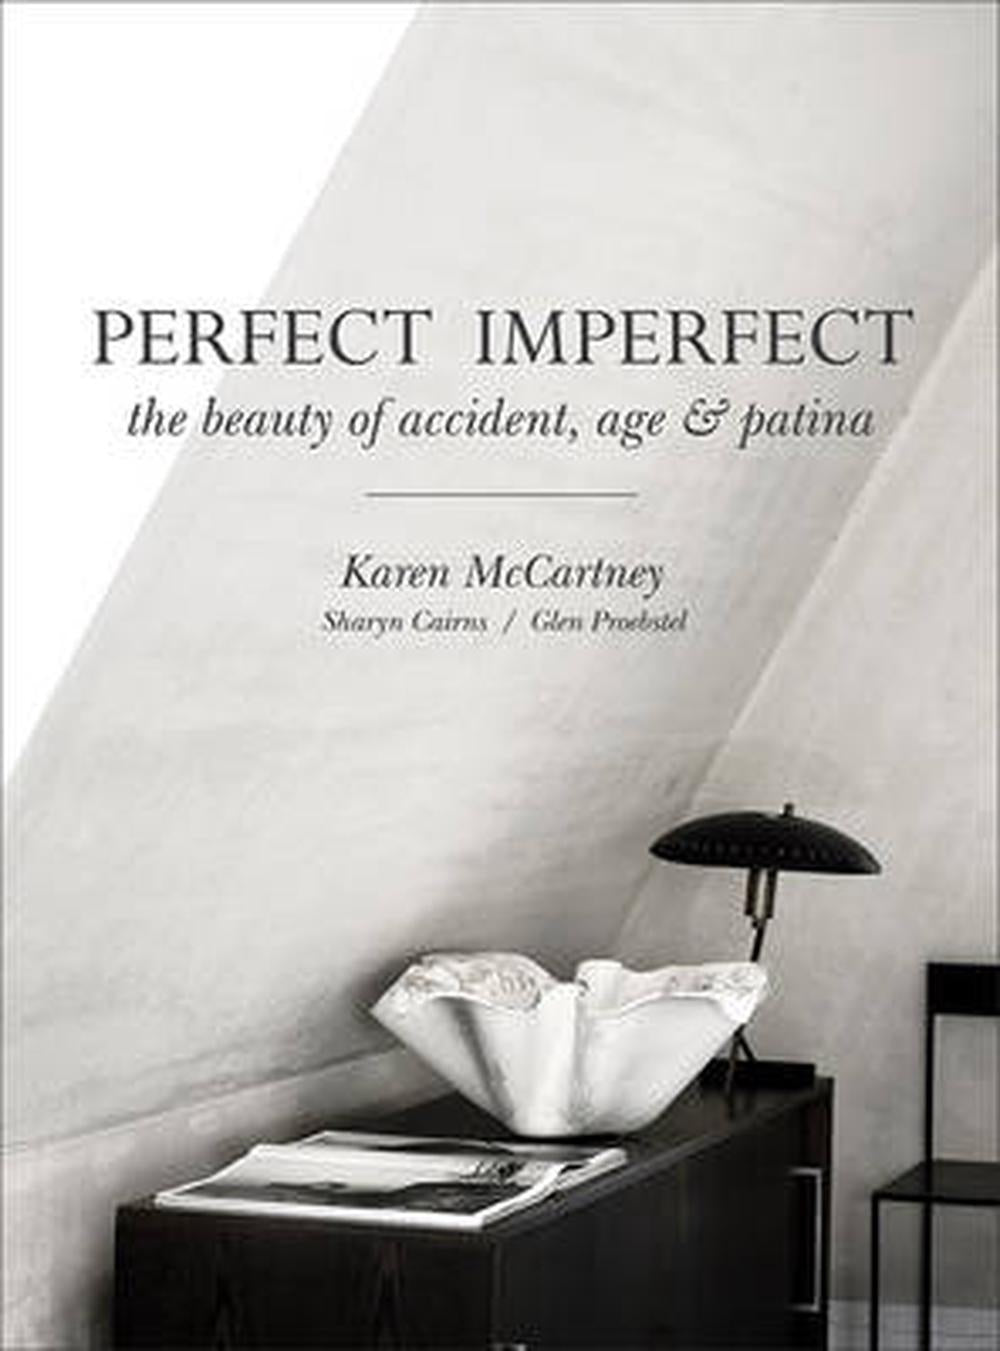 Perfect Imperfect - Found My Way Invercargill